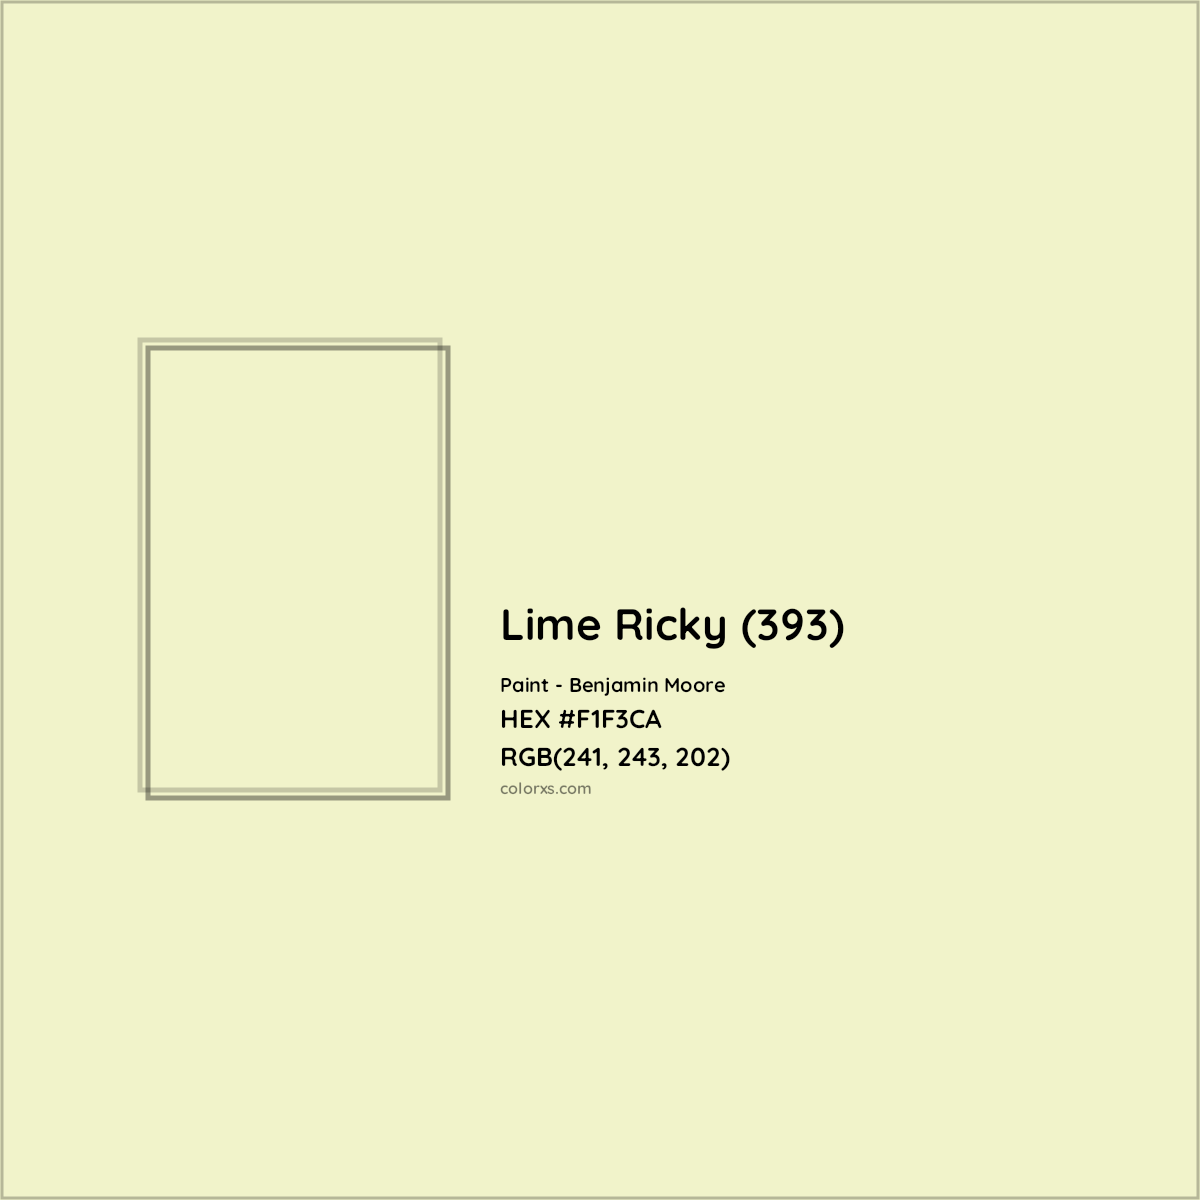 HEX #F1F3CA Lime Ricky (393) Paint Benjamin Moore - Color Code